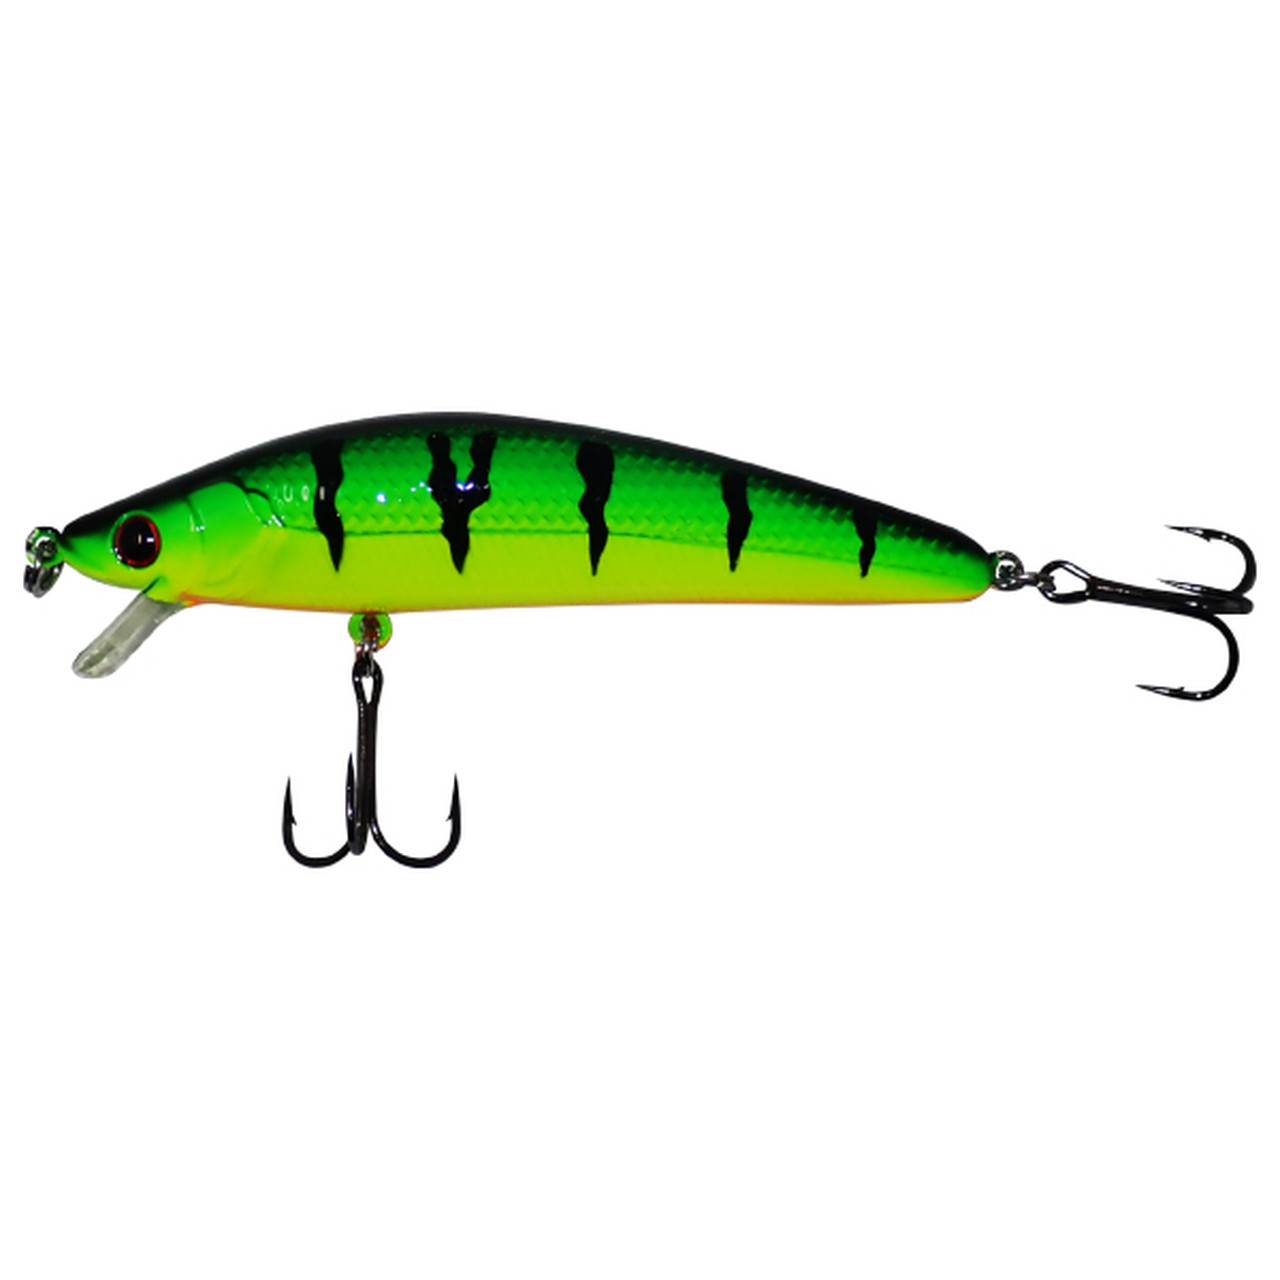 SteelShad Floater Diver Series Fishing Lure - Ultralight - 1/8 oz